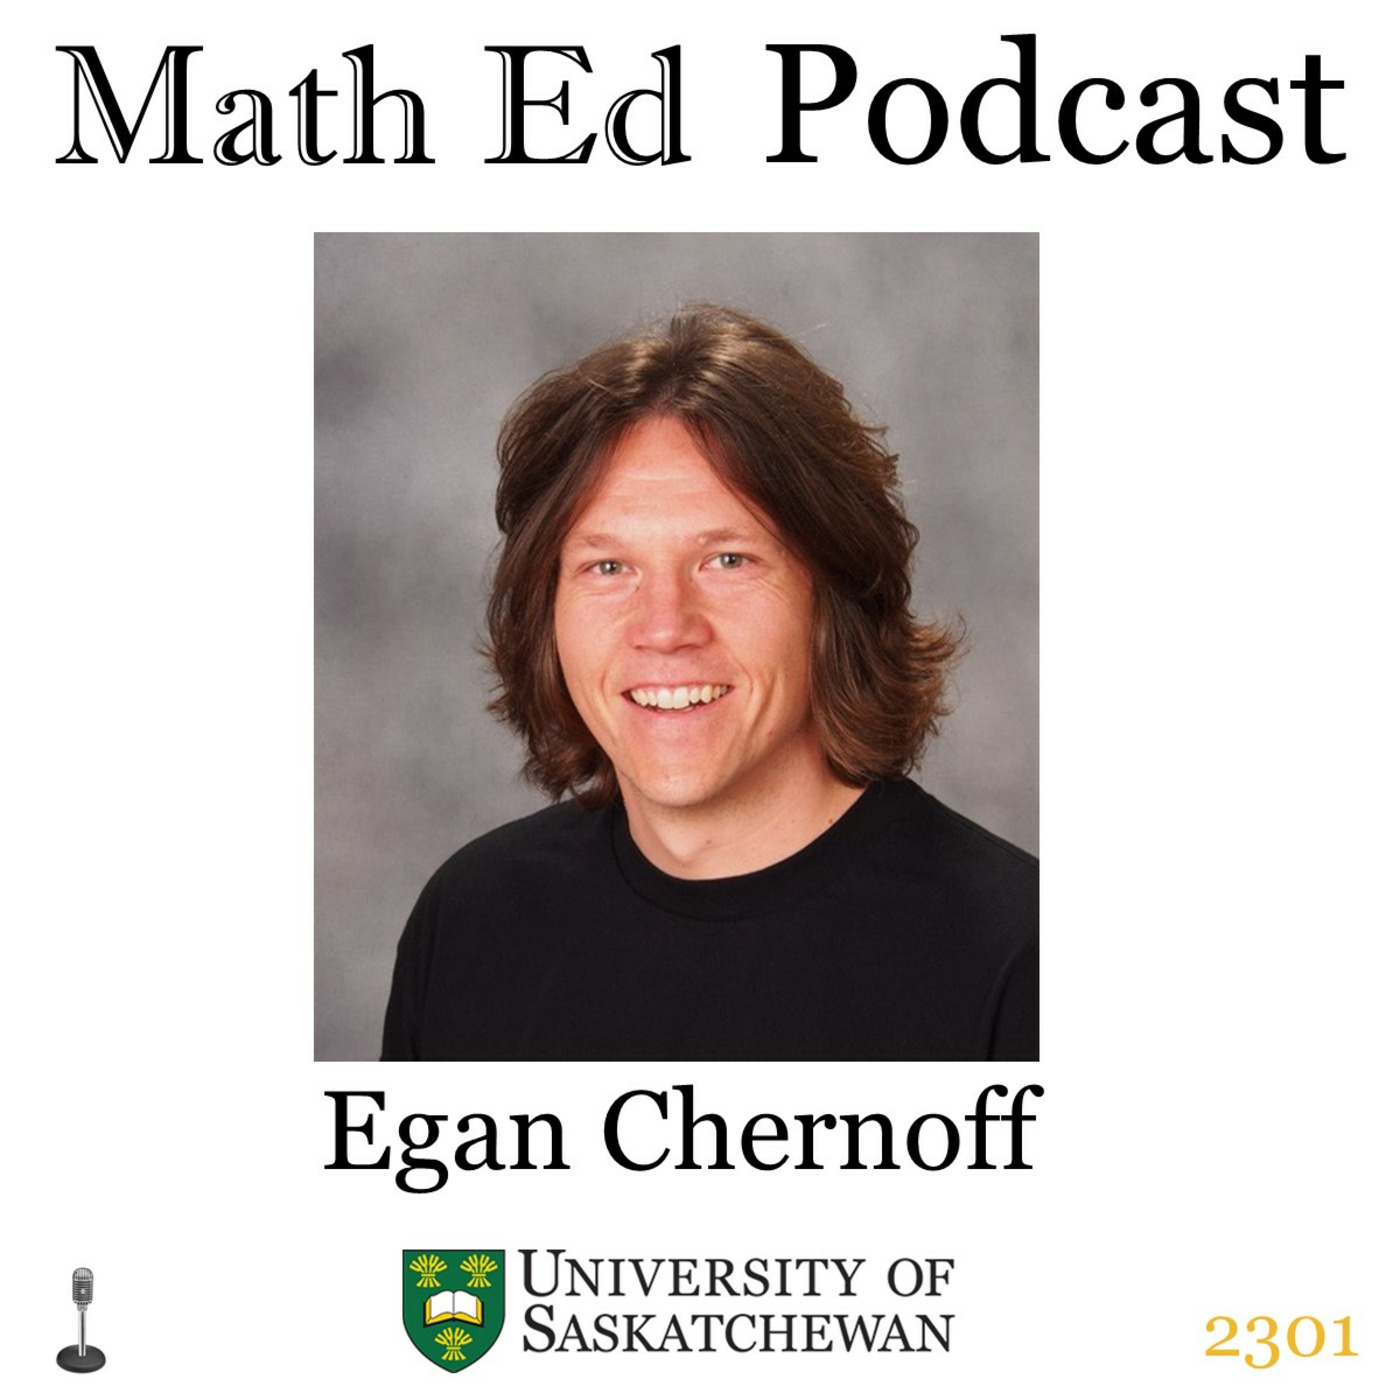 Episode 2301: Egan Chernoff – Popularizing Math, Questions about the Math Ed Podcast